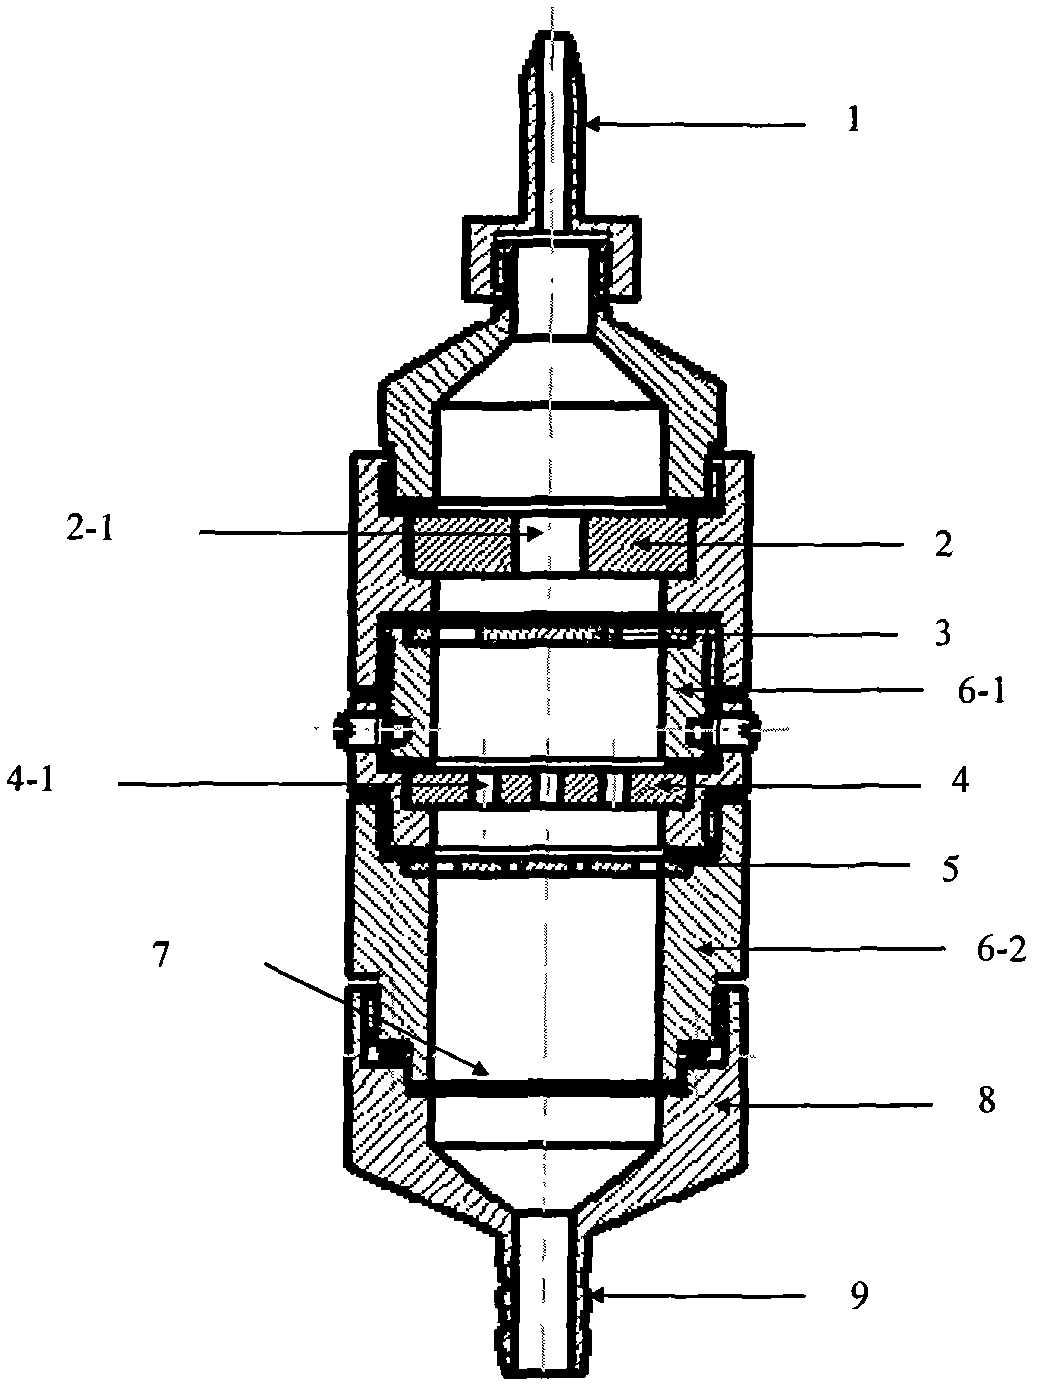 Radioactive aerosol particle recovery device